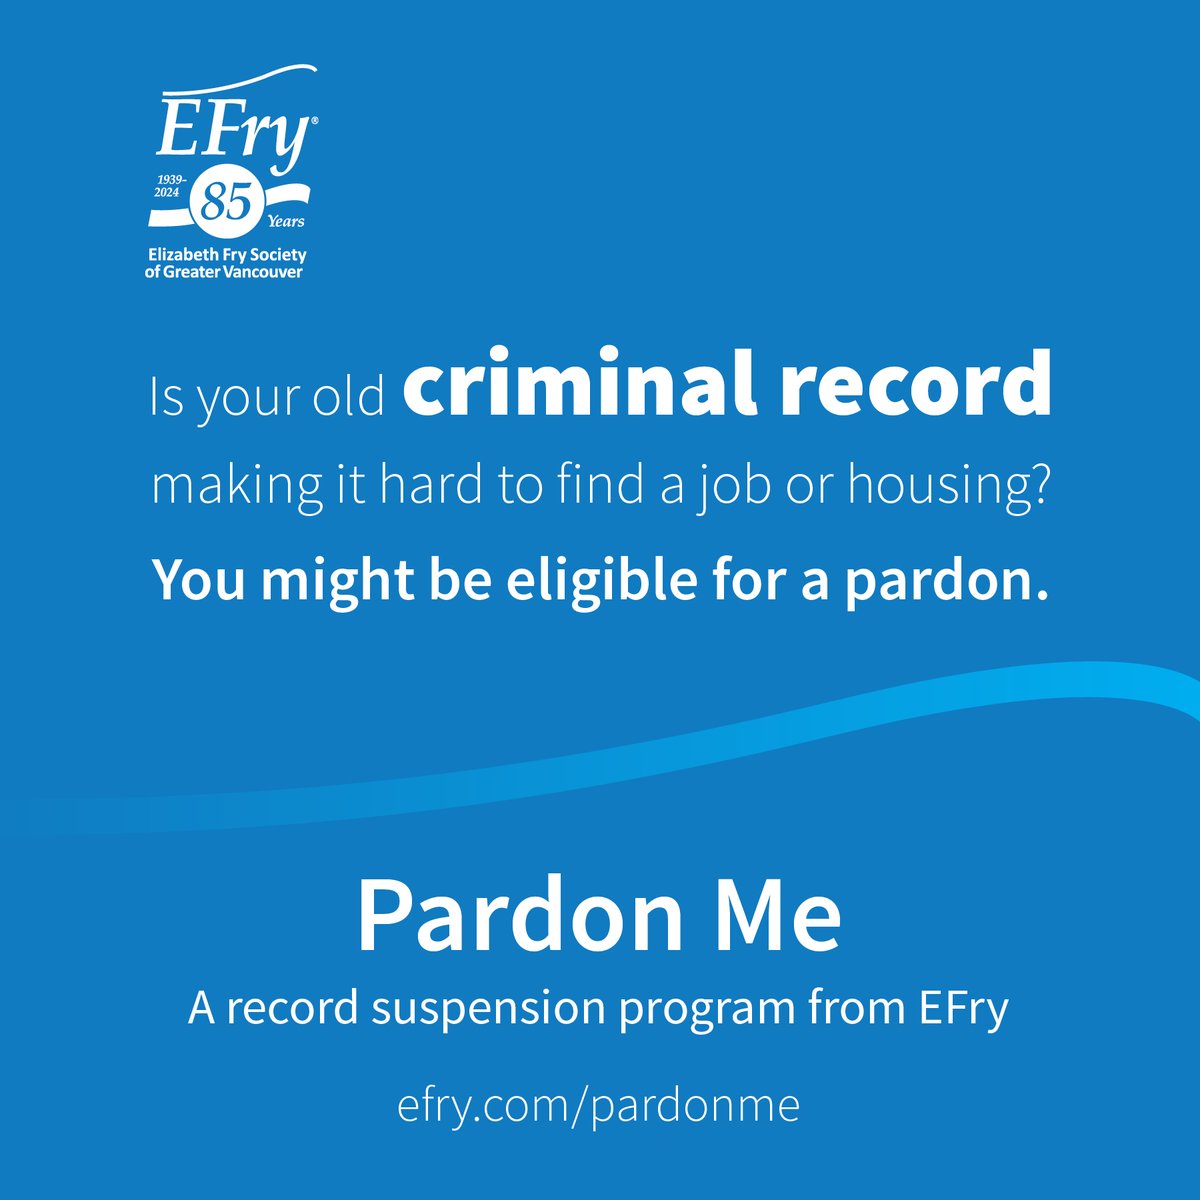 If your record is 3 years old or older, you may qualify for a pardon. Contact our #PardonMe team today to learn more about this free program that will support you through the process.